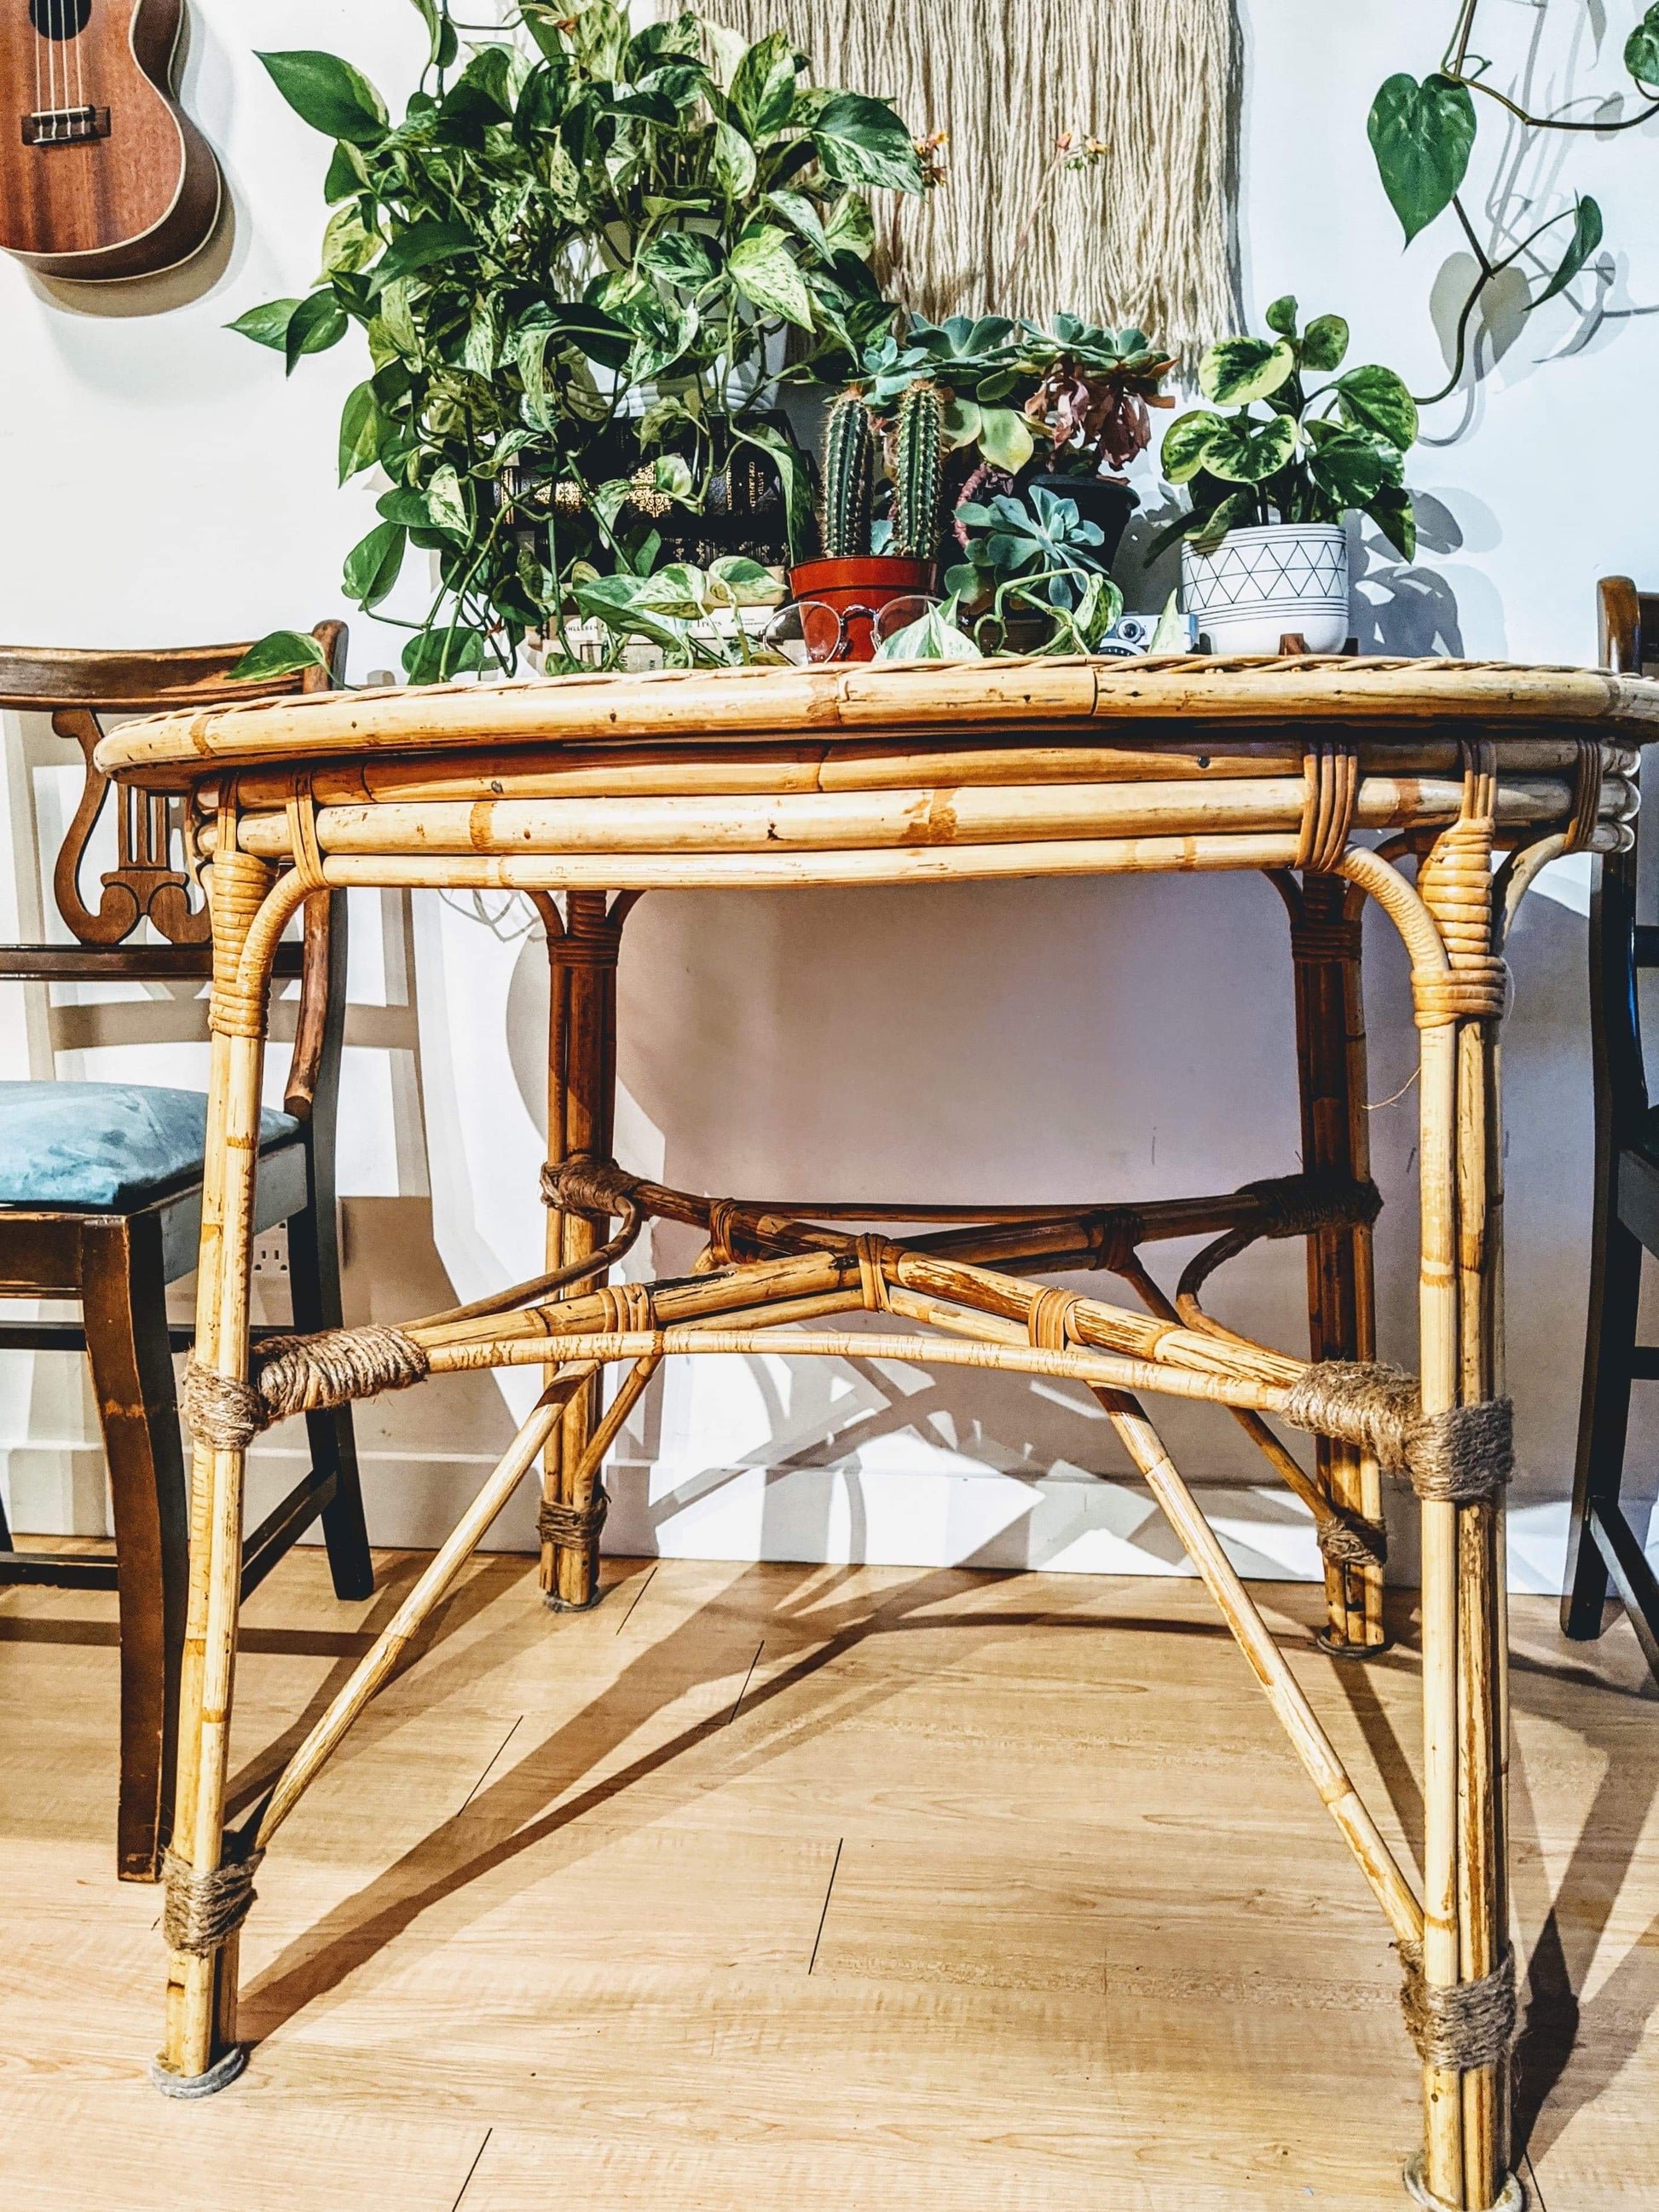 Wicker Bamboo Bohemian Style Dinning Table  Edit alt text